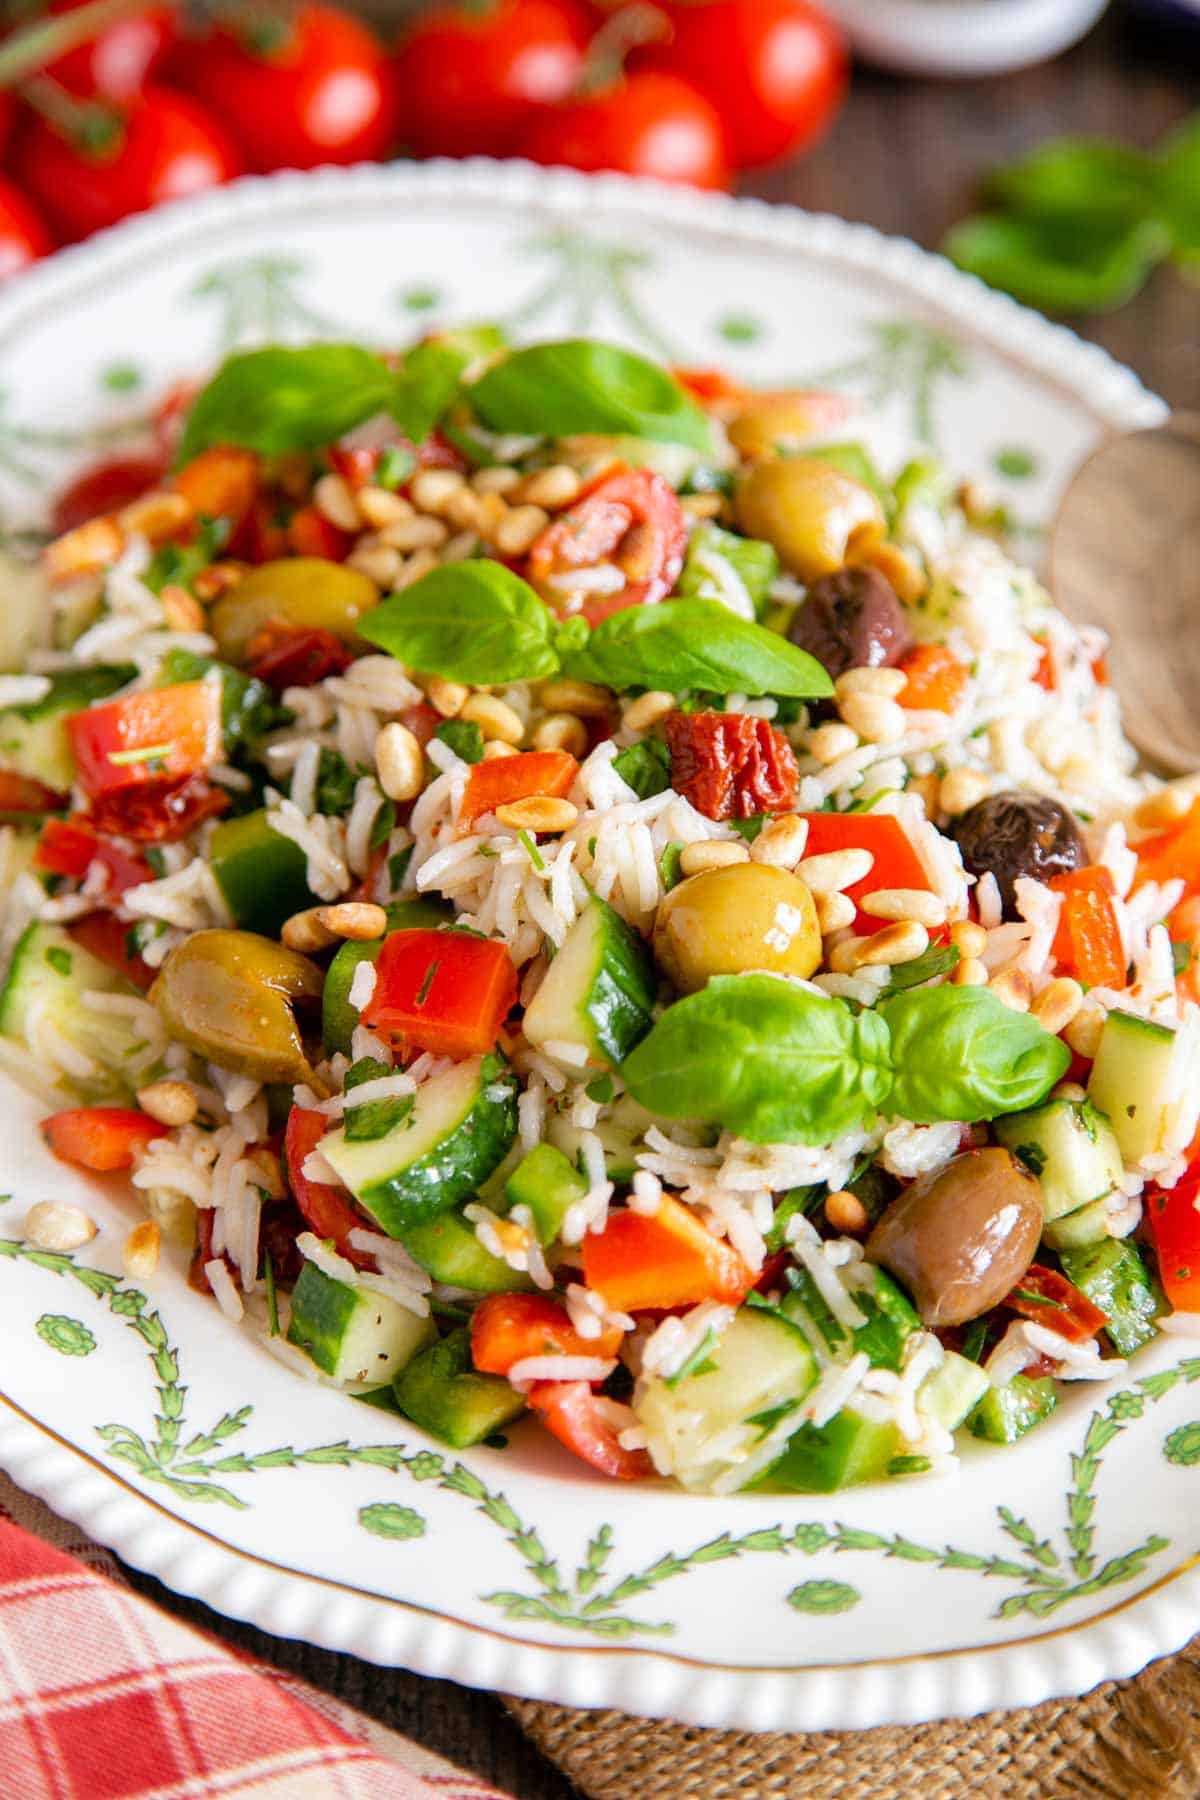 A close up view of Italian rice salad, white rice packed with vibrant vegetables and herbs.